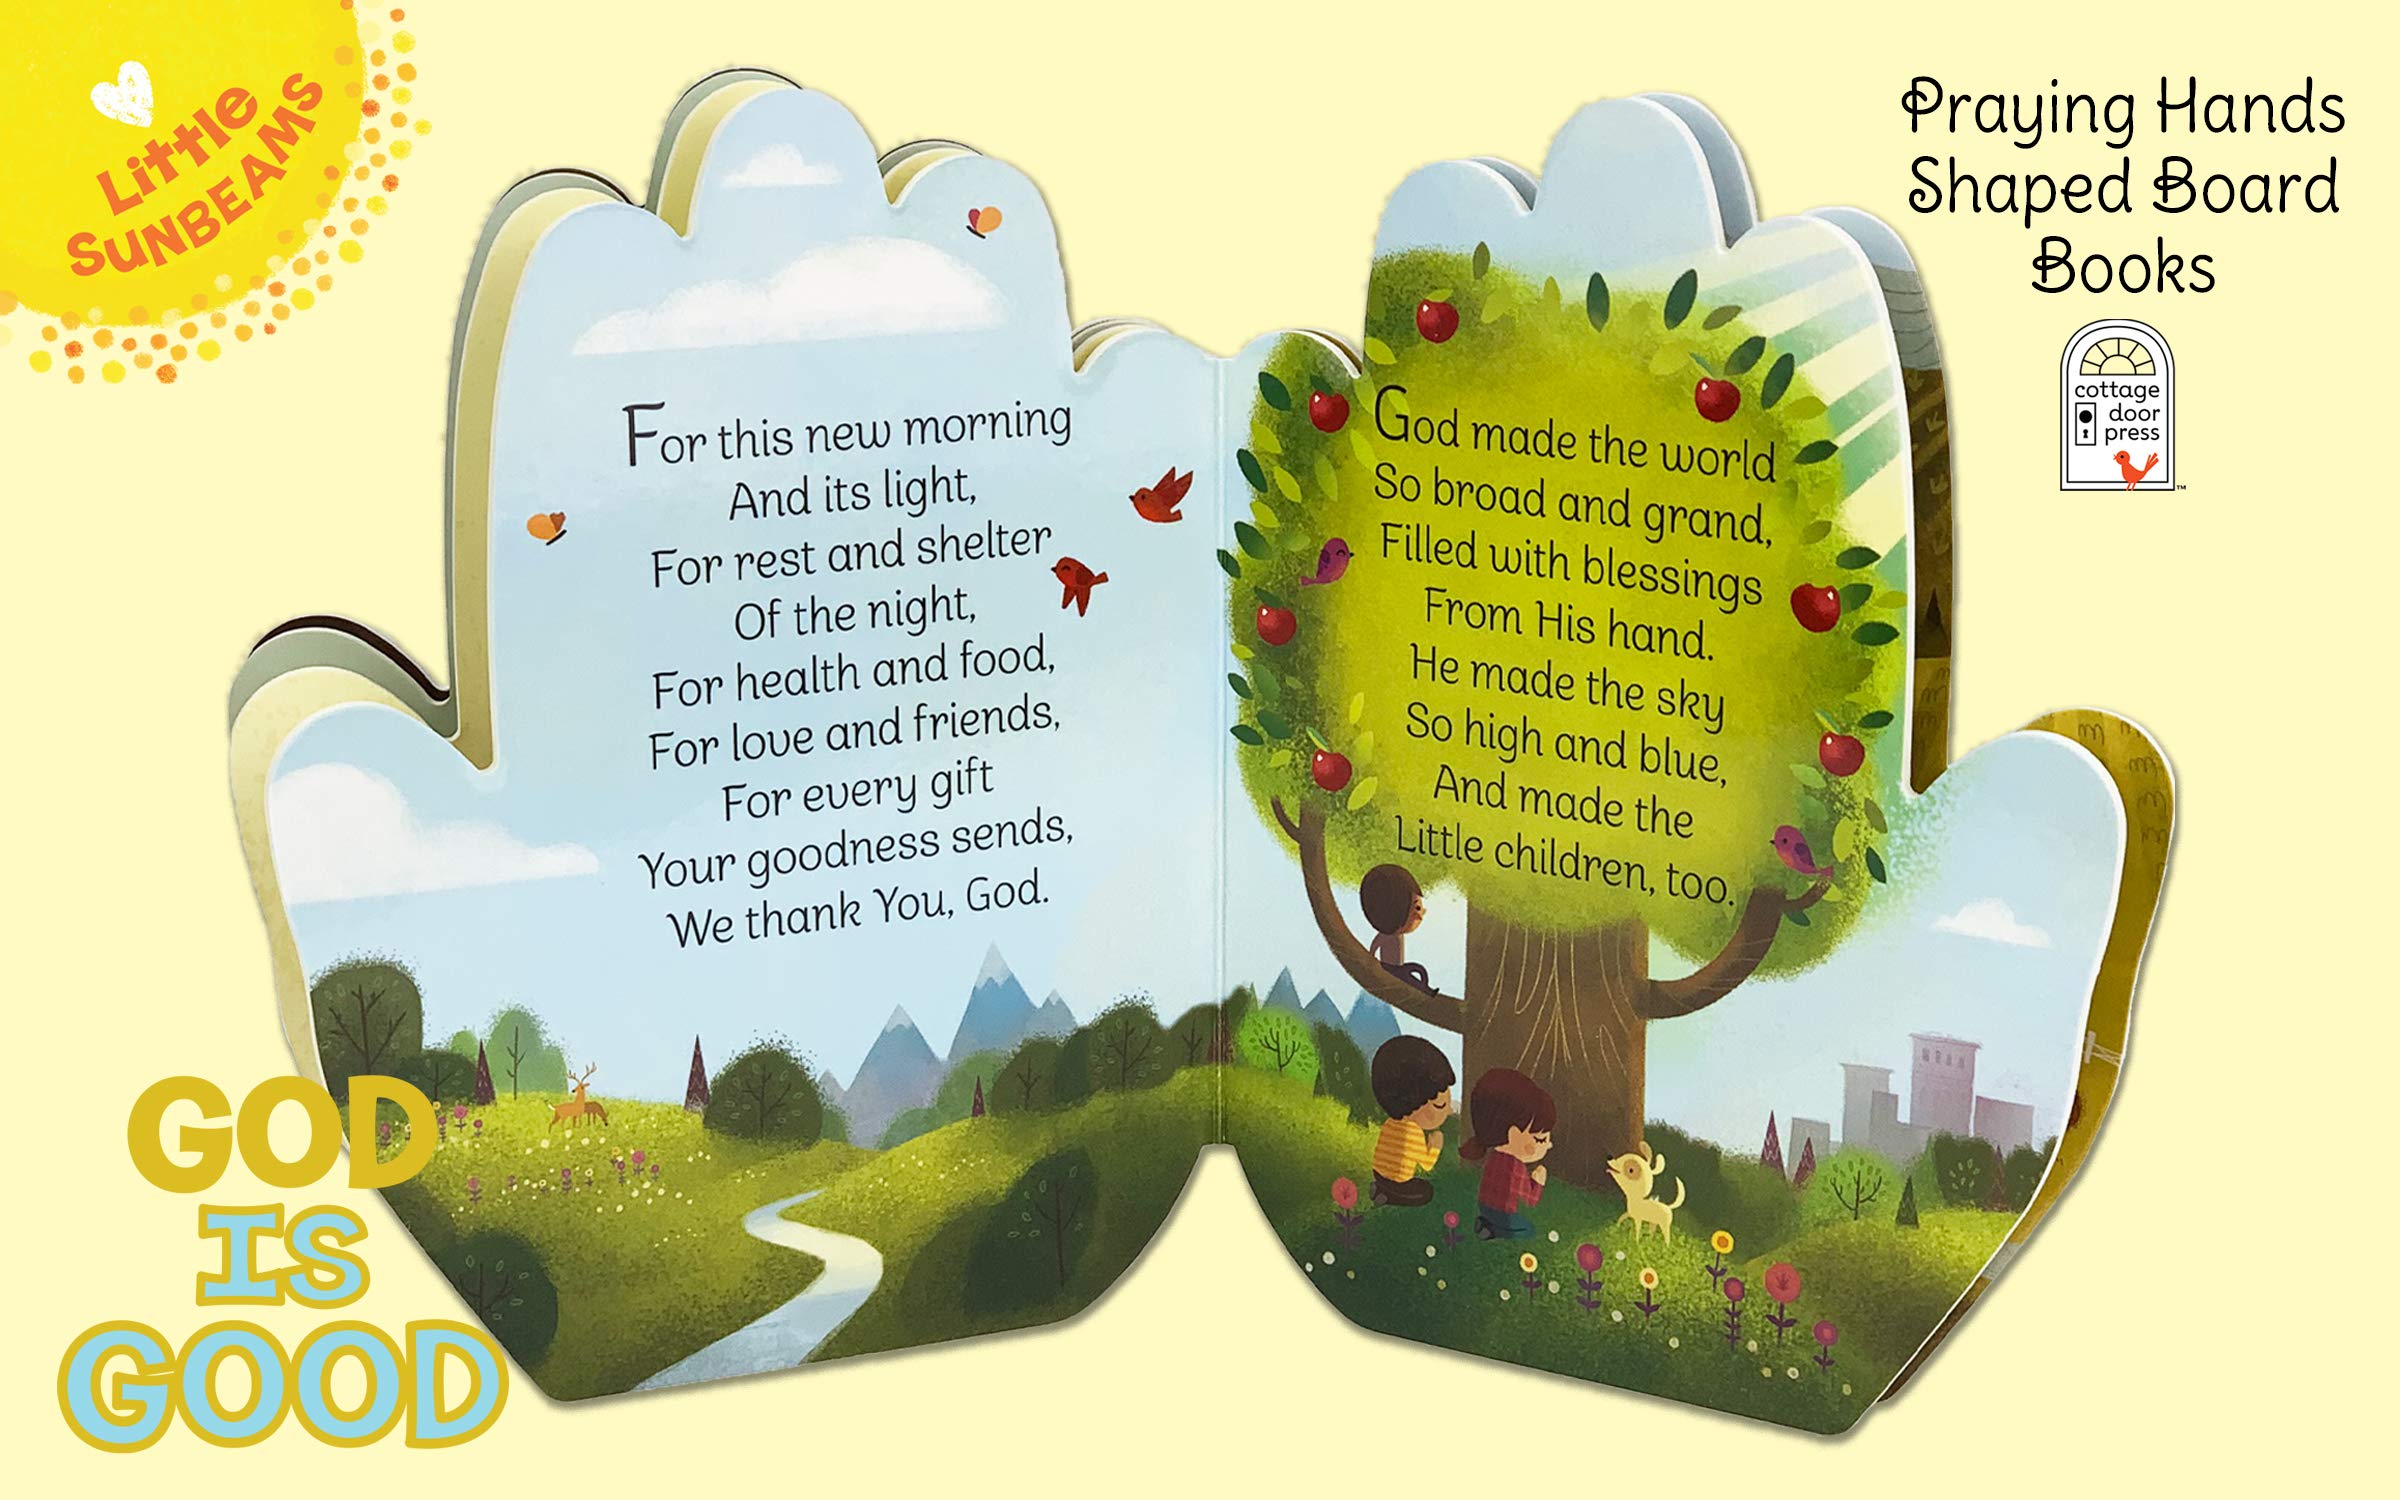 God is Good Praying Hands Board Book - Gift for Easter, Christmas, Communions, Birthdays, and more! Ages 1-5 (Little Sunbeams)